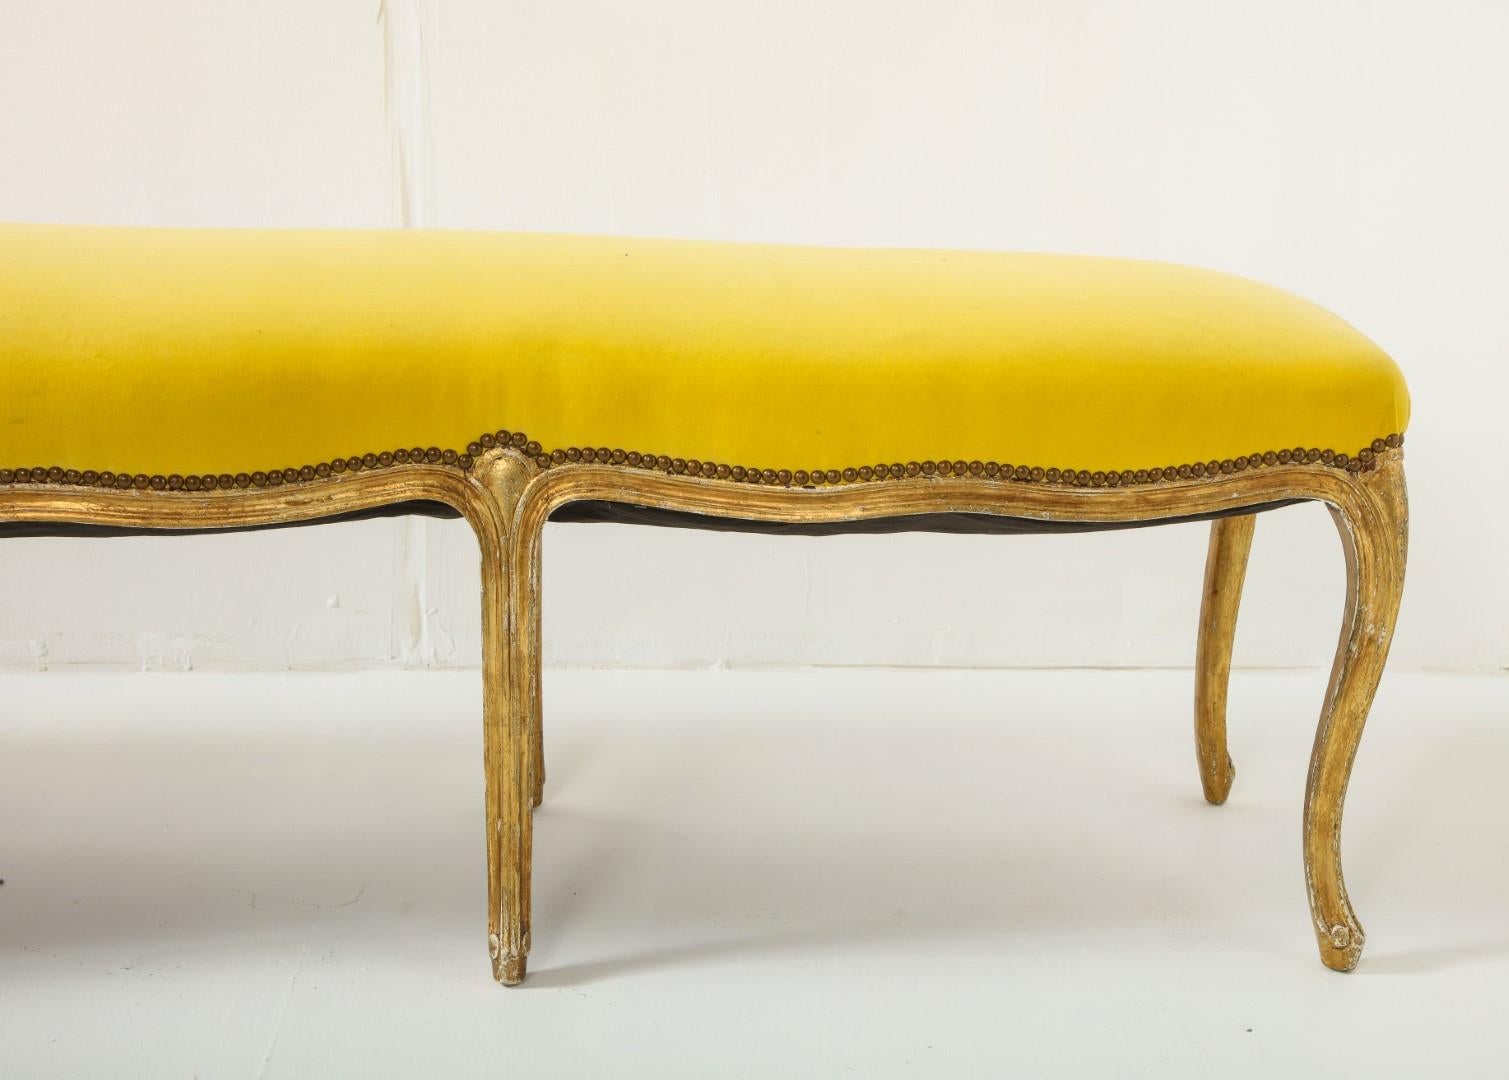 1930s French Louis XVI Style bench with carved and gilded cabriole legs. Top is recently upholstered in lemon yellow Kravet Versailles velvet, with brass nail head detail.